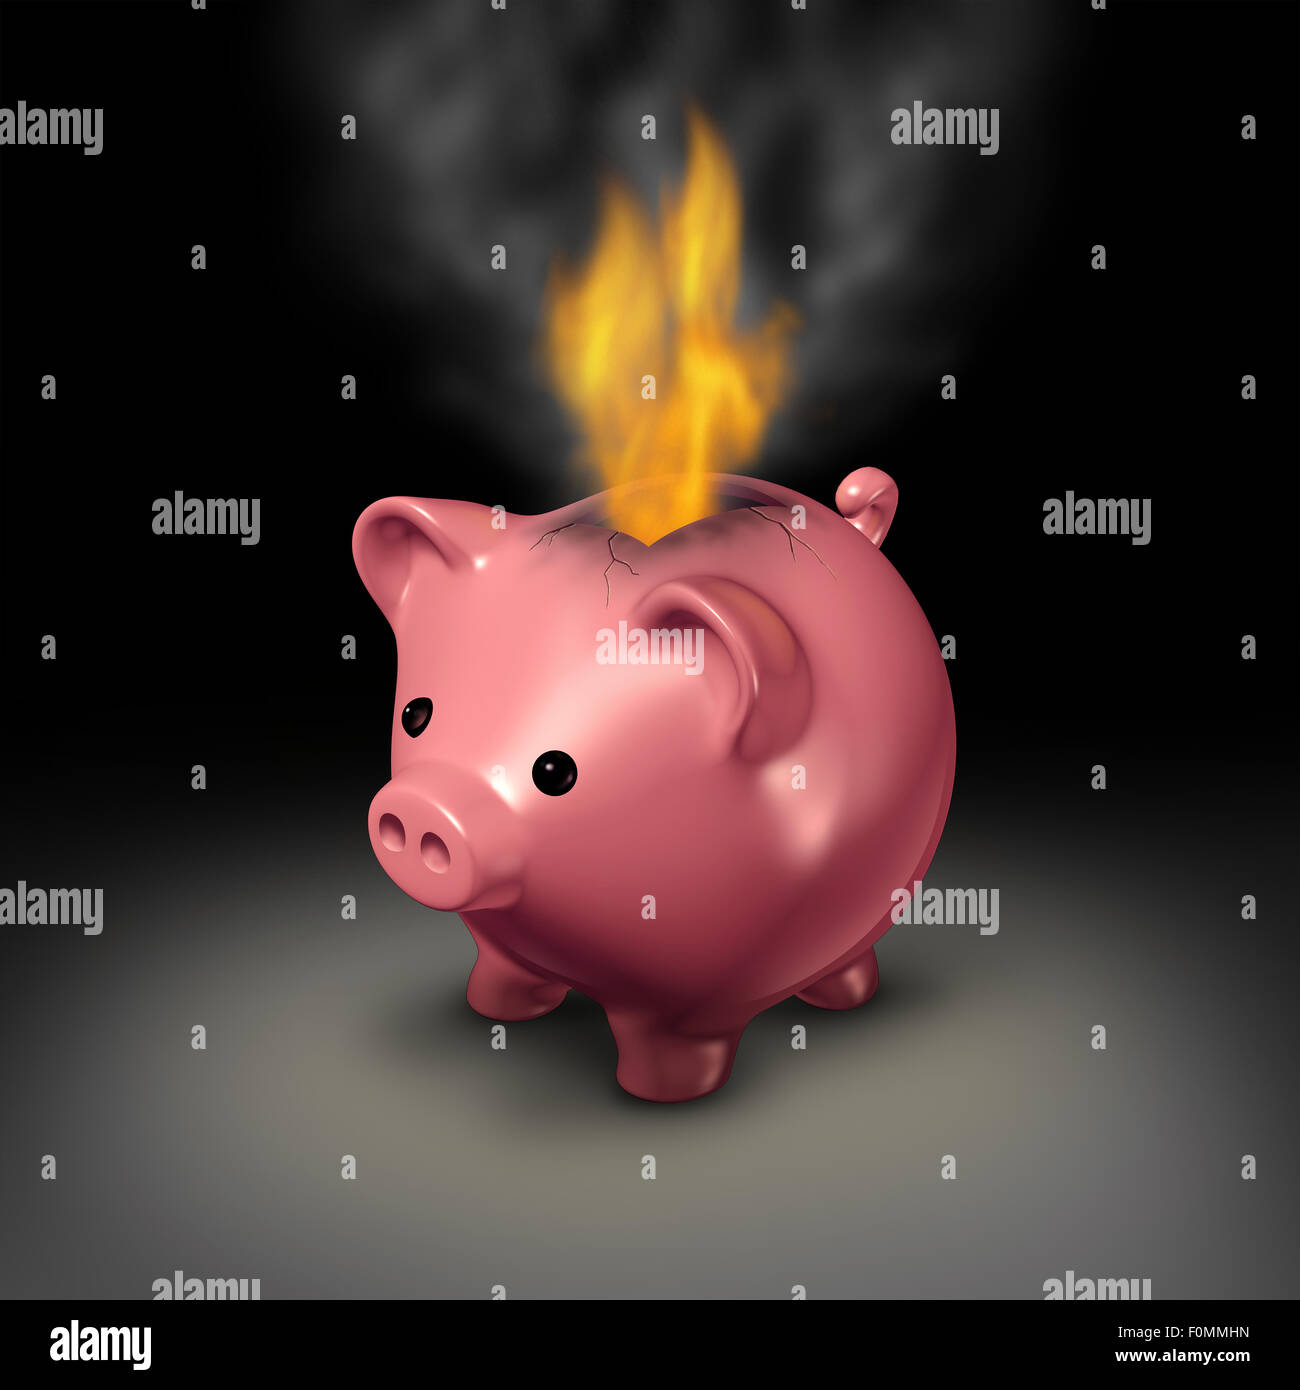 Burning money and careless spending financial concept as a piggy bank with flames and smoke coming out because of currency. Stock Photo